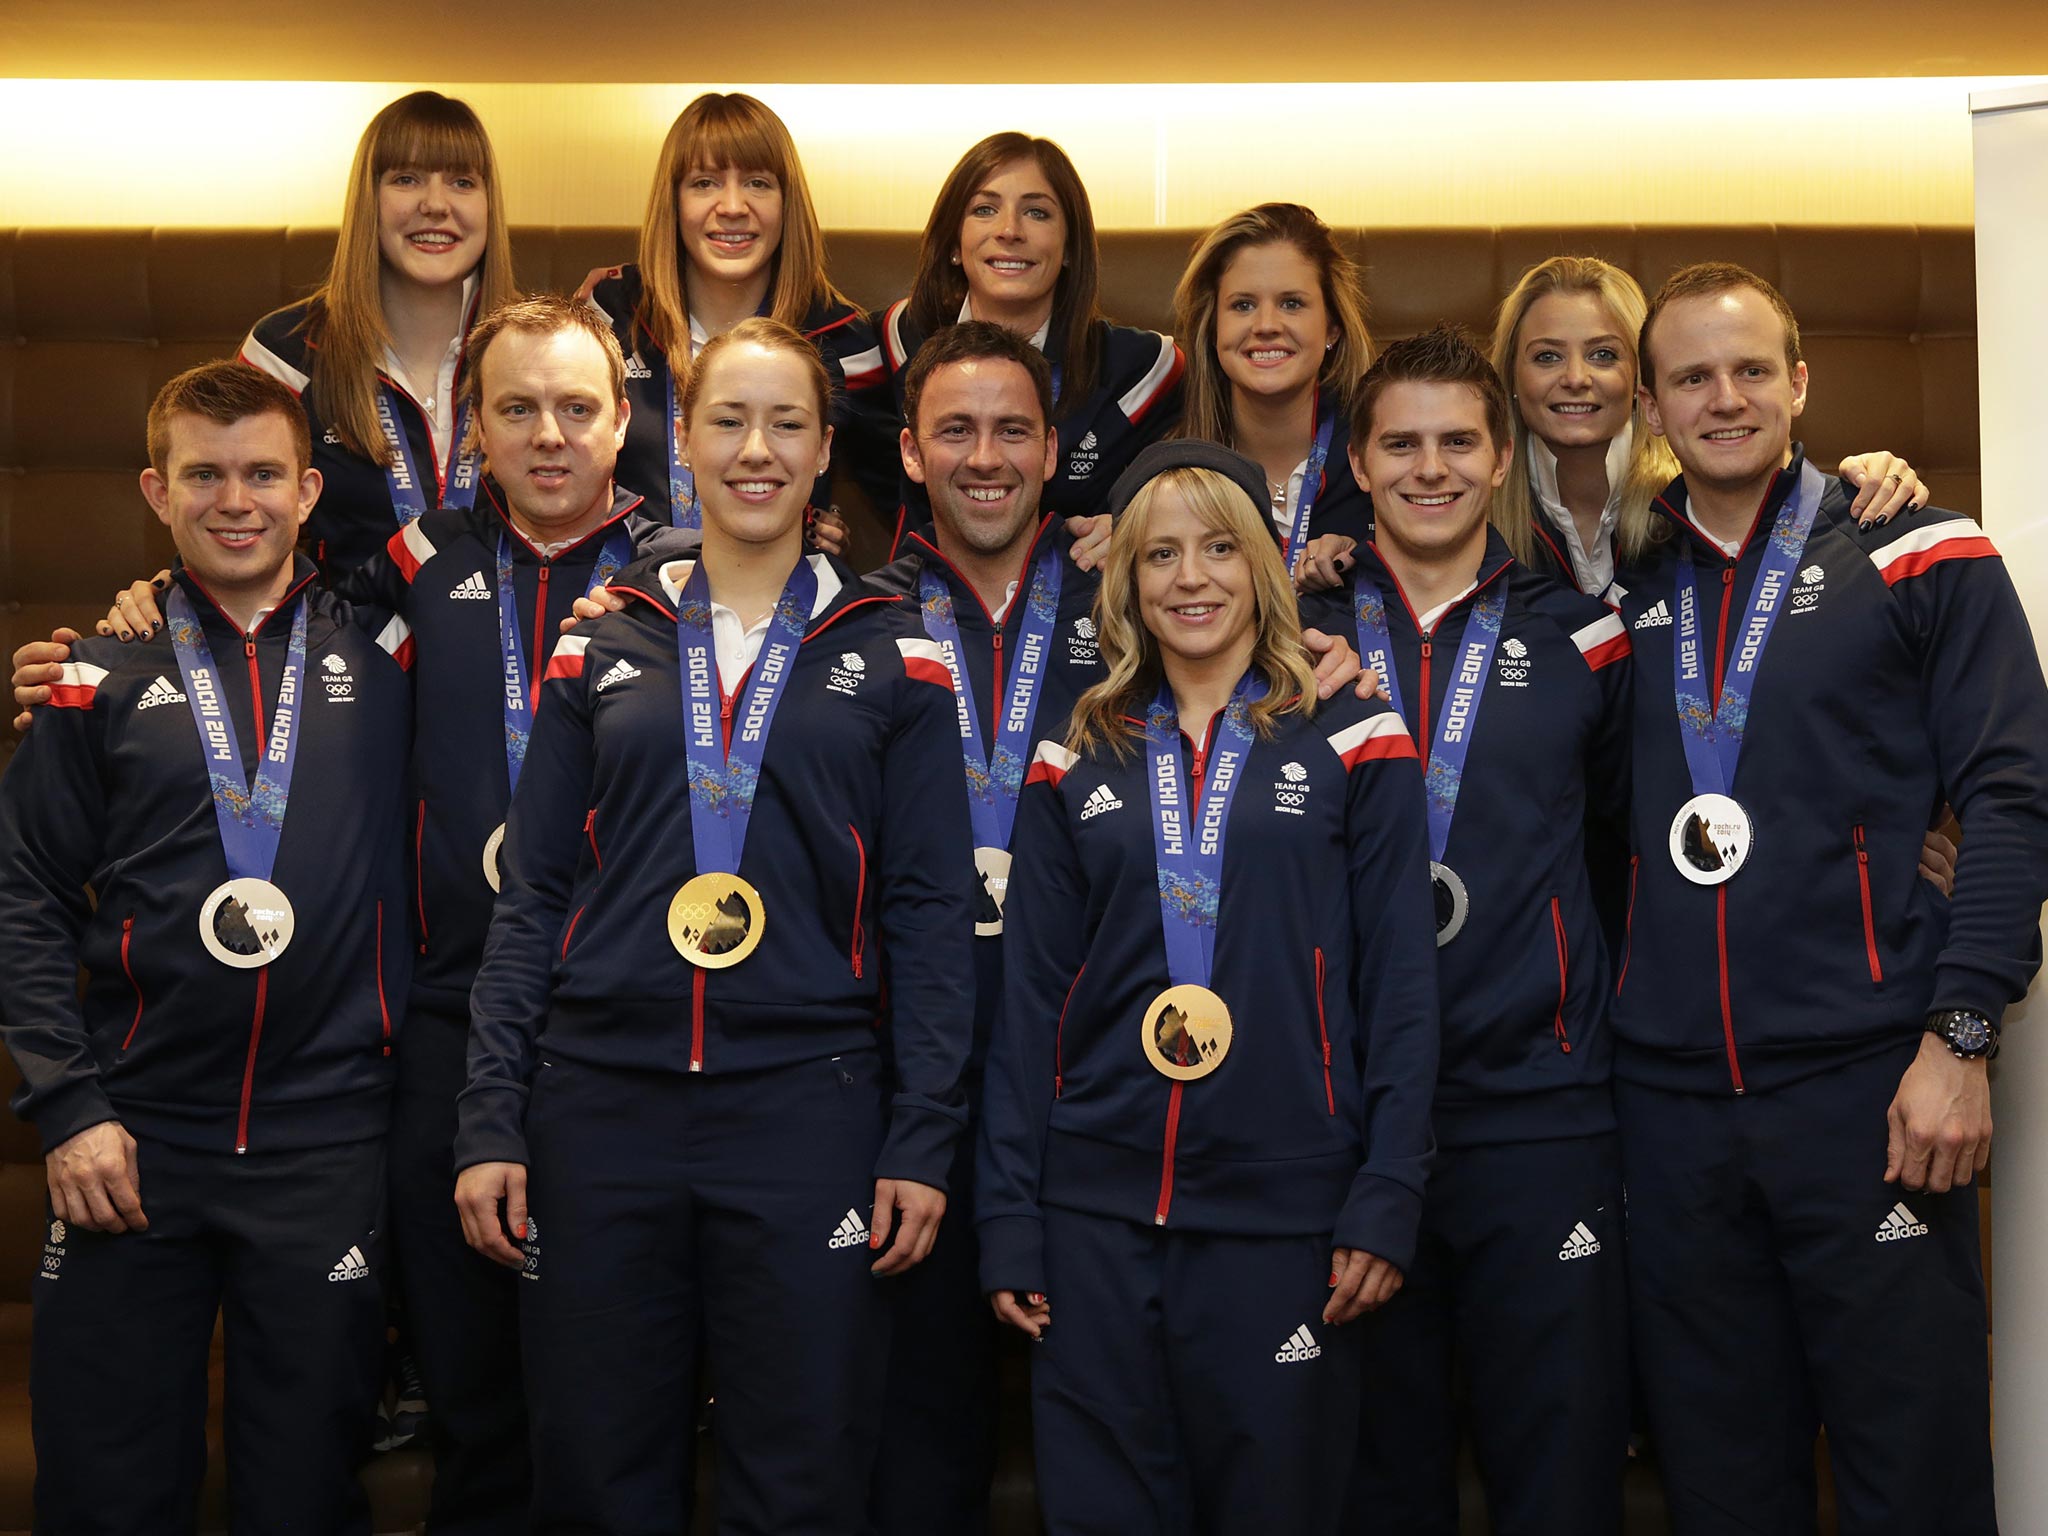 Team GB's medal winners including Lizzy Yarnold, David Murdoch, Eve Muihead and Claire Hamilton